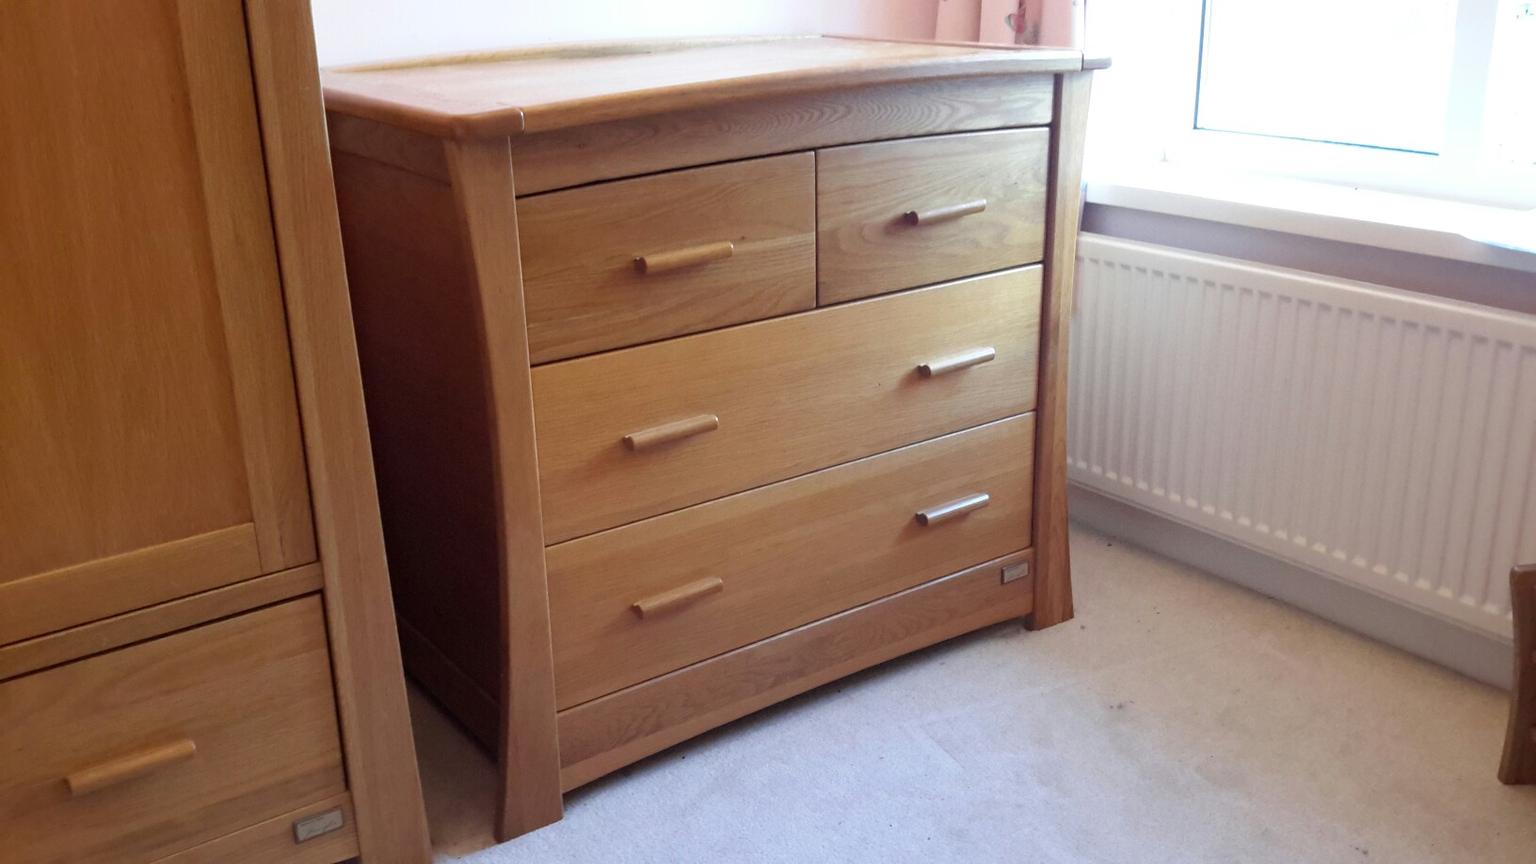 Mamas Papas Ocean Dresser Changing Unit In S40 Chesterfield Fur